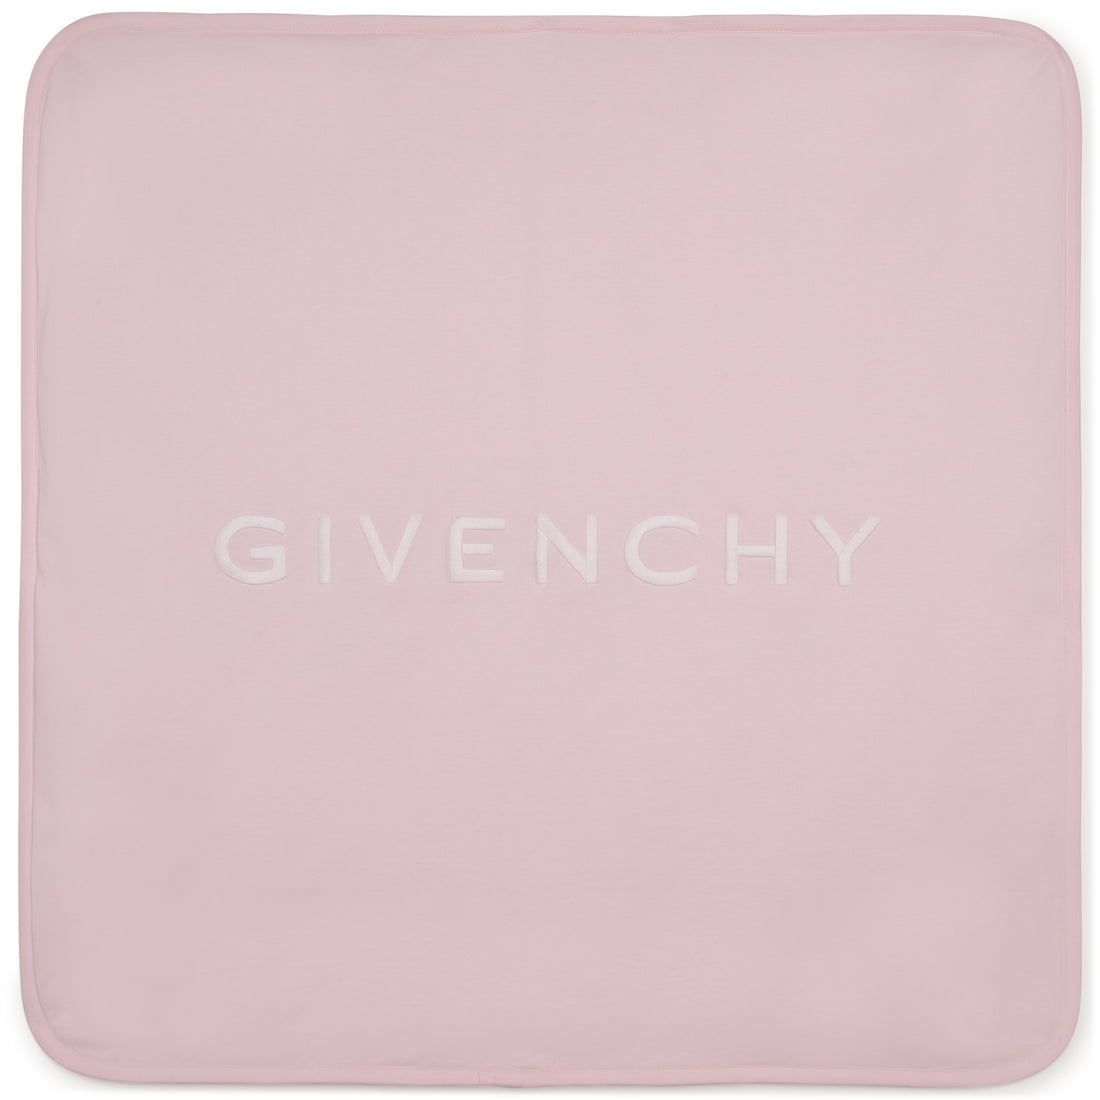 Givenchy Blanket Style: H90180